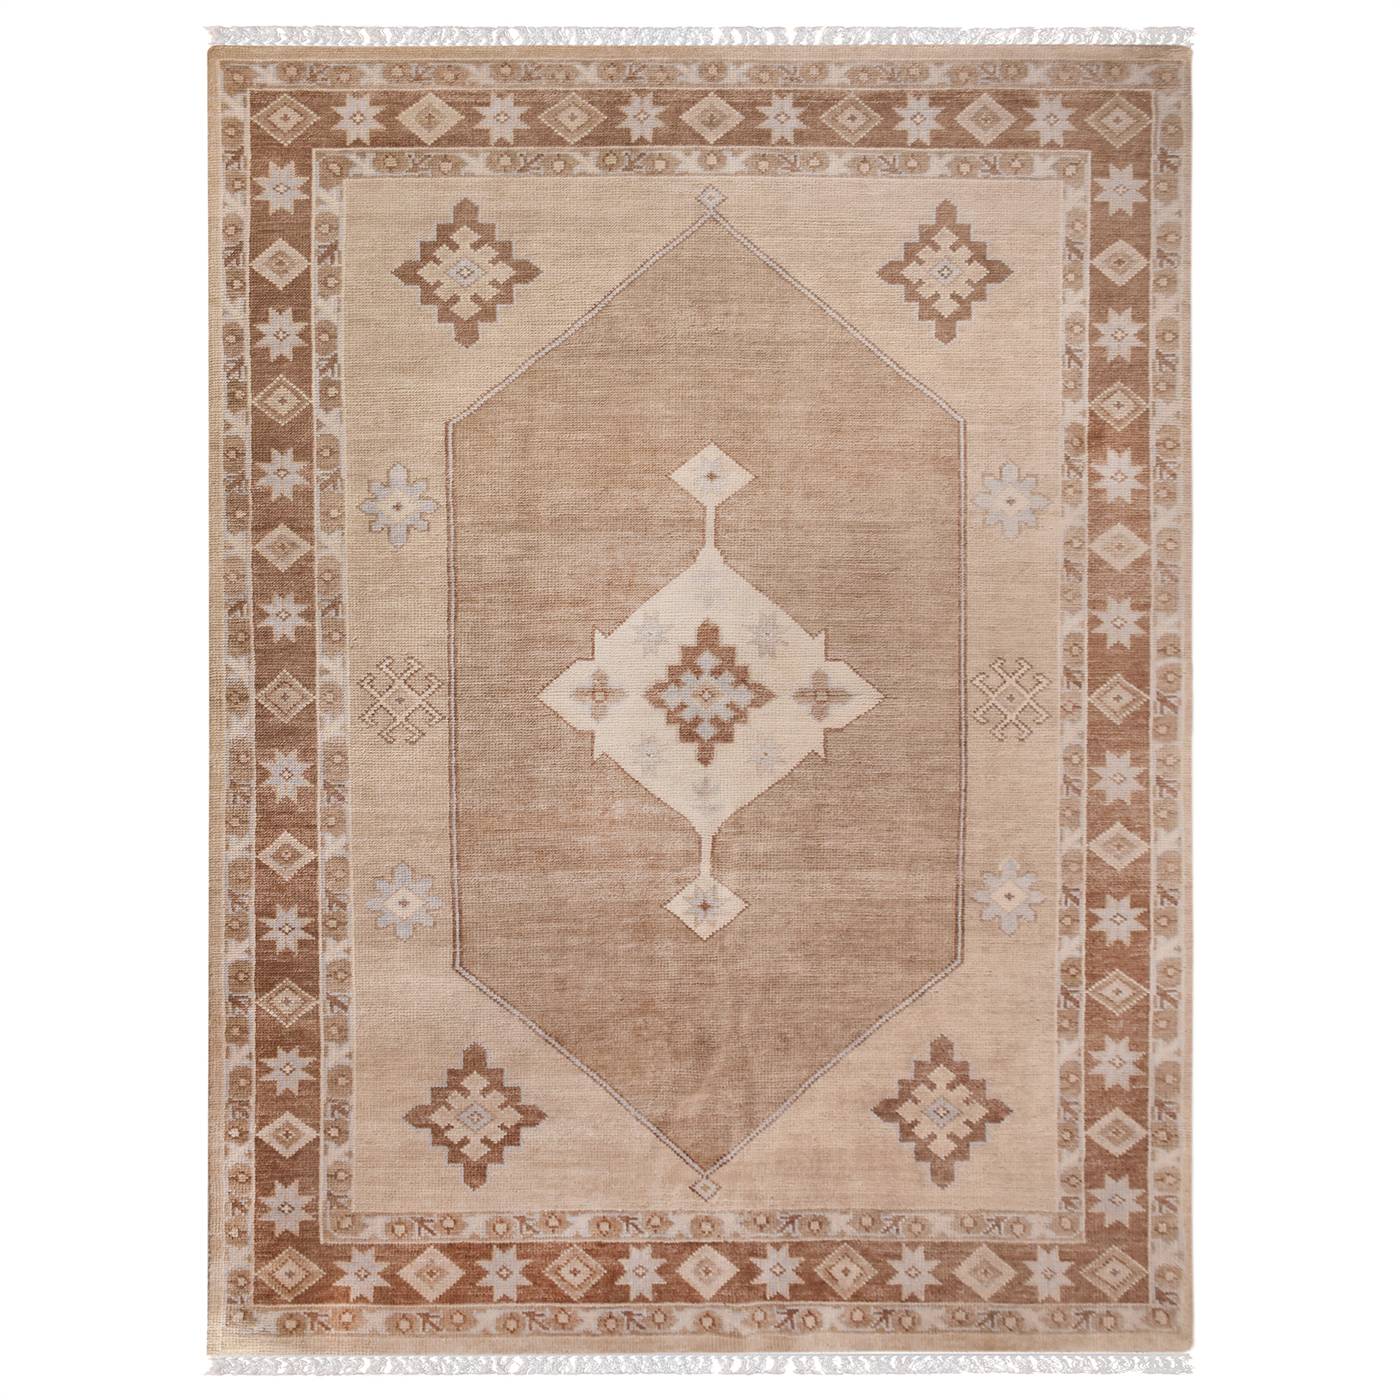 Area Rug, Bedroom Rug, Living Room Rug, Living Area Rug, Indian Rug, Office Carpet, Office Rug, Shop Rug Online, Beige, Brown , Wool, Hand Knotted , Handknotted, All Cut, Contemporary 